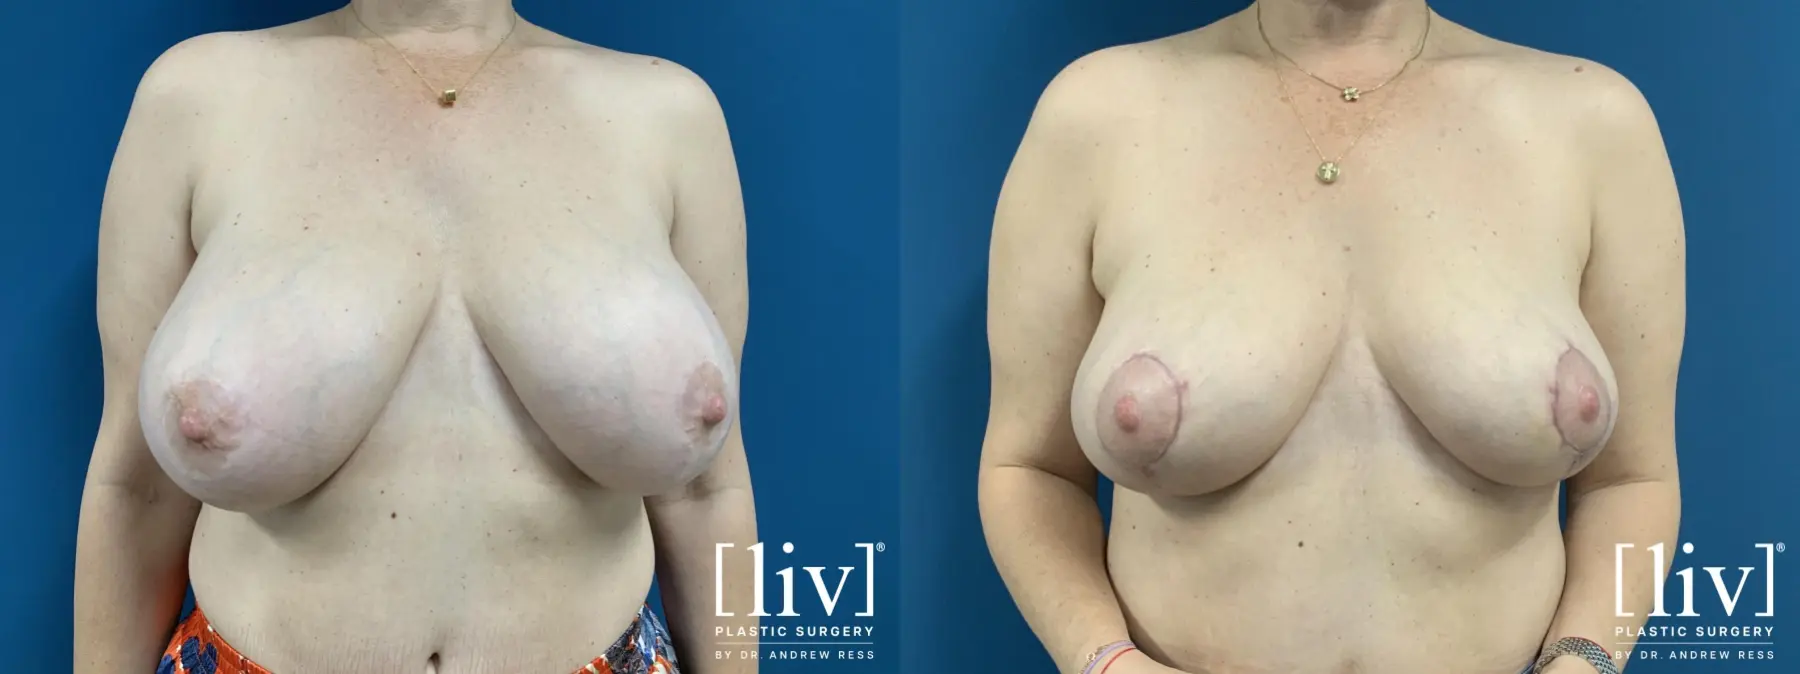 Implant removal with Breast Lift and Fat Transfer to Breast  - Before and After 1